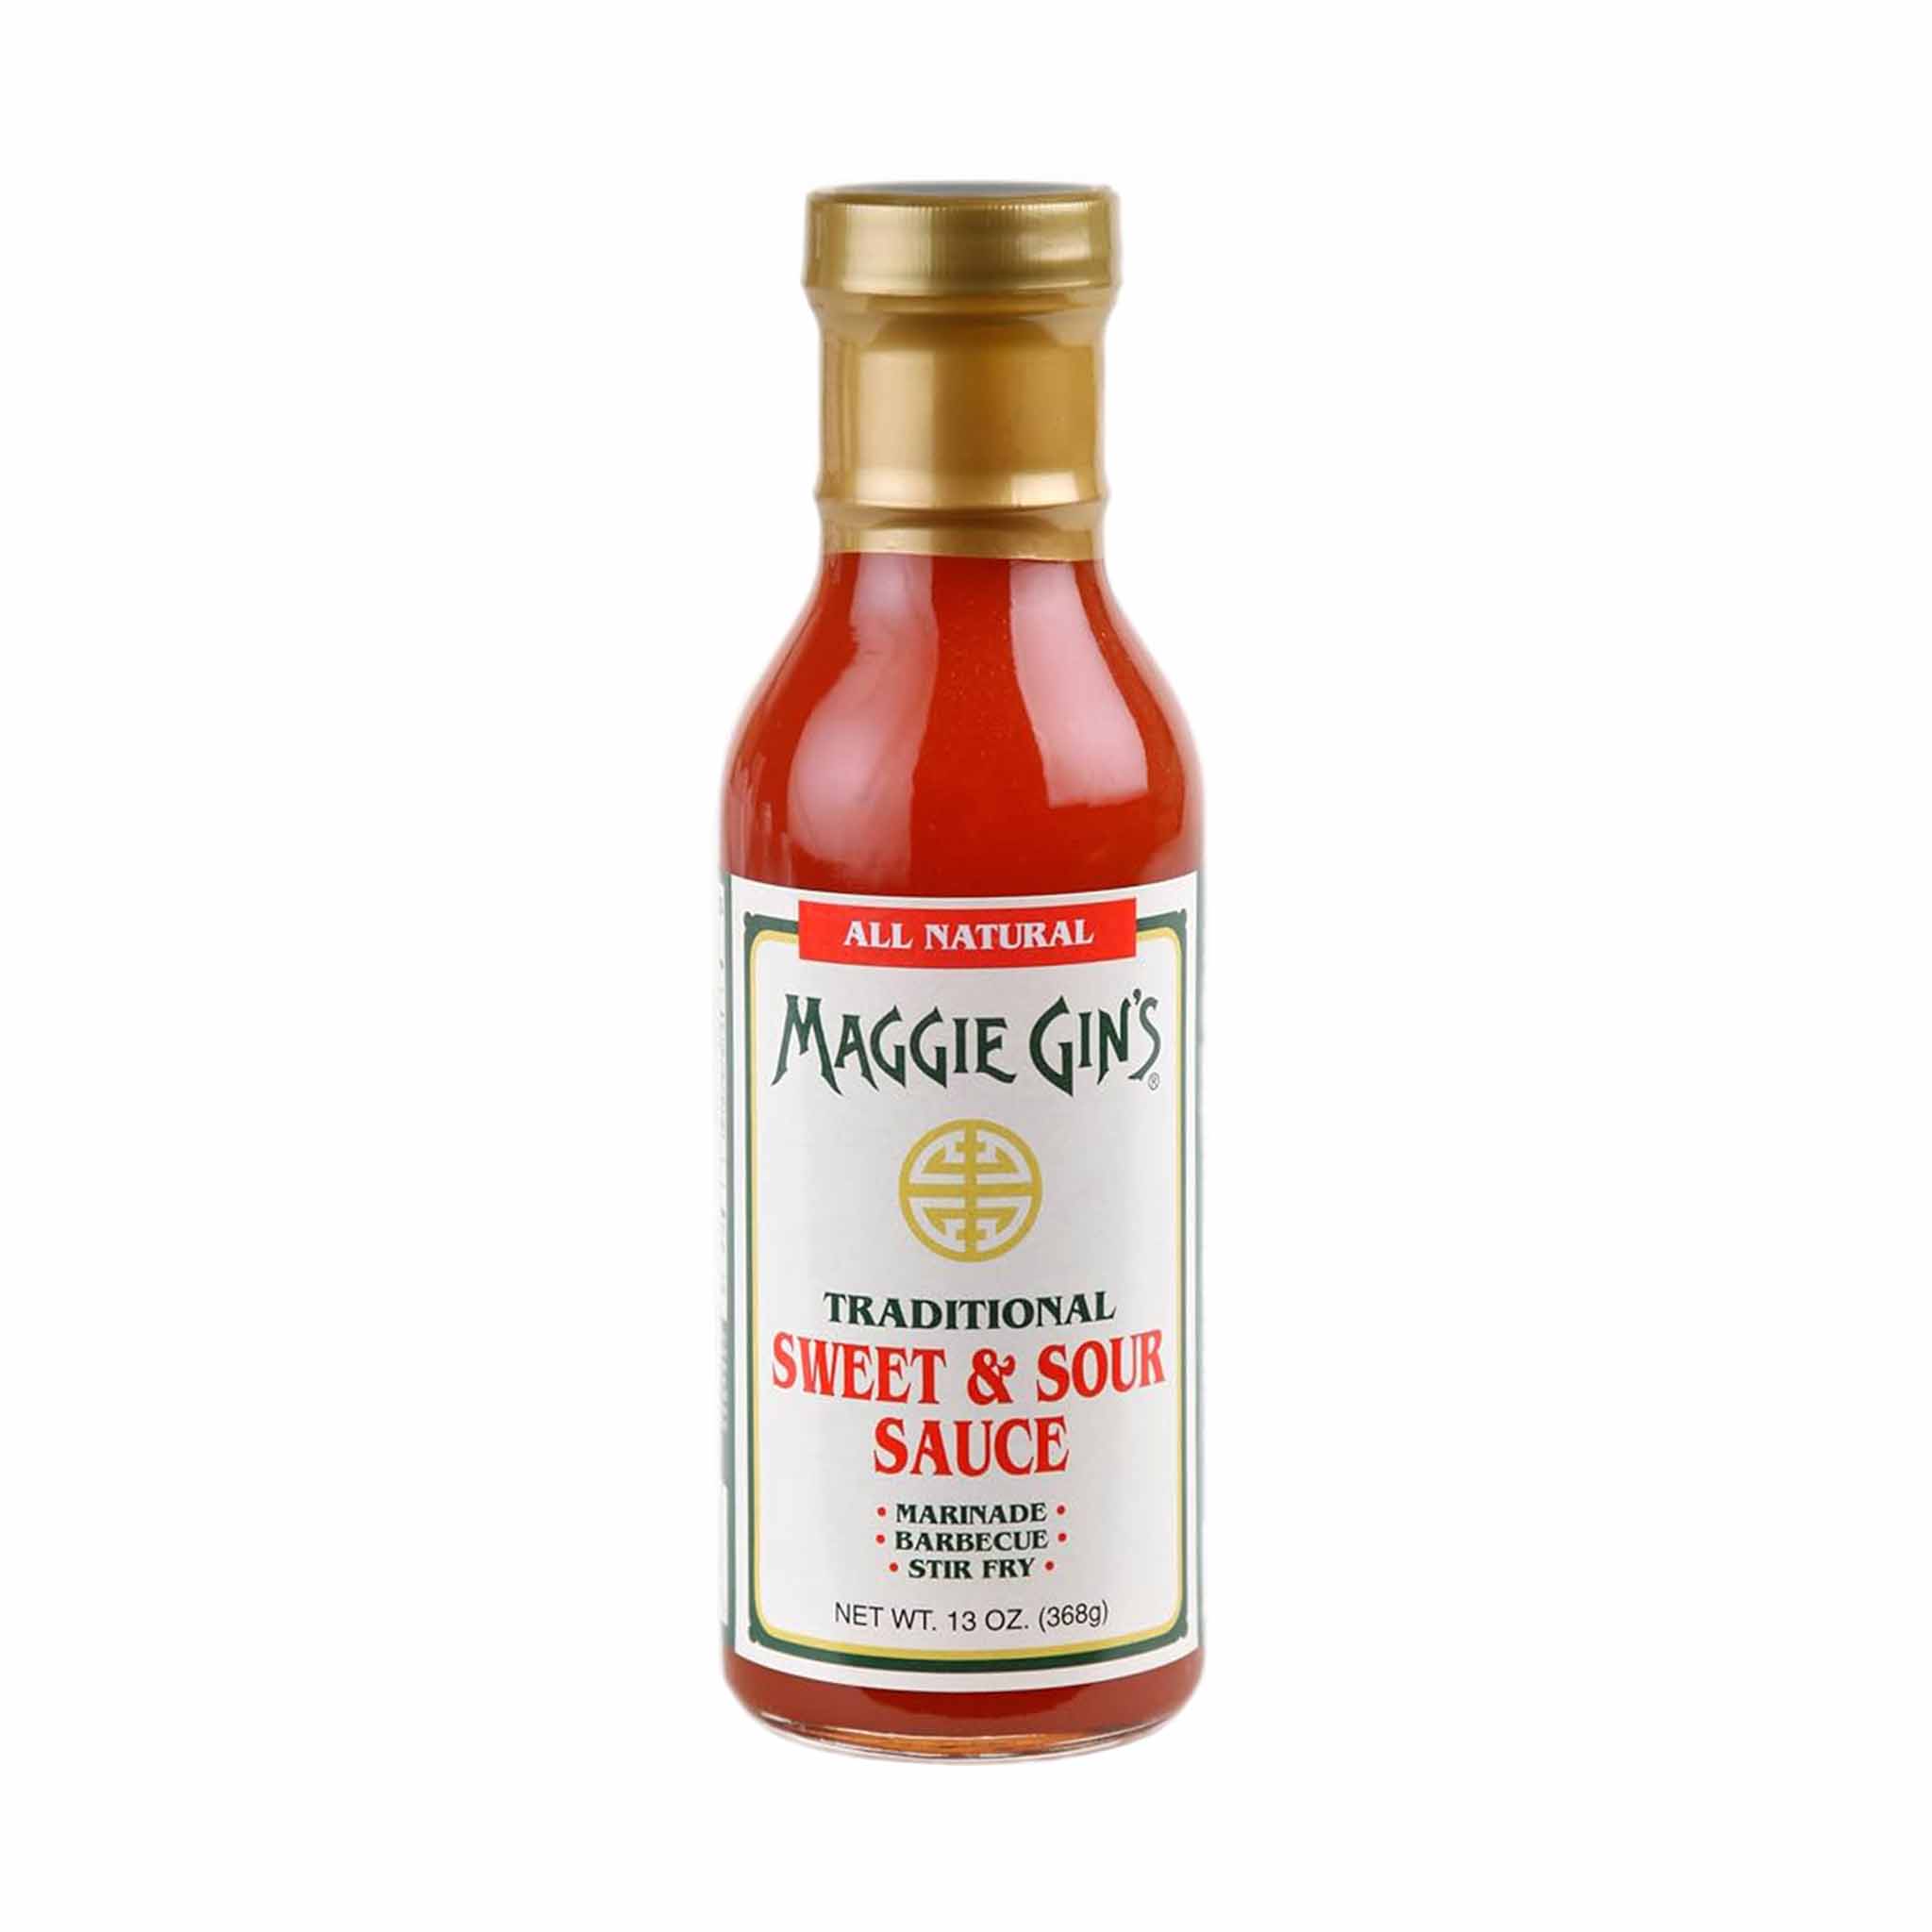 Maggie Gin's Sweet Sour Sauce